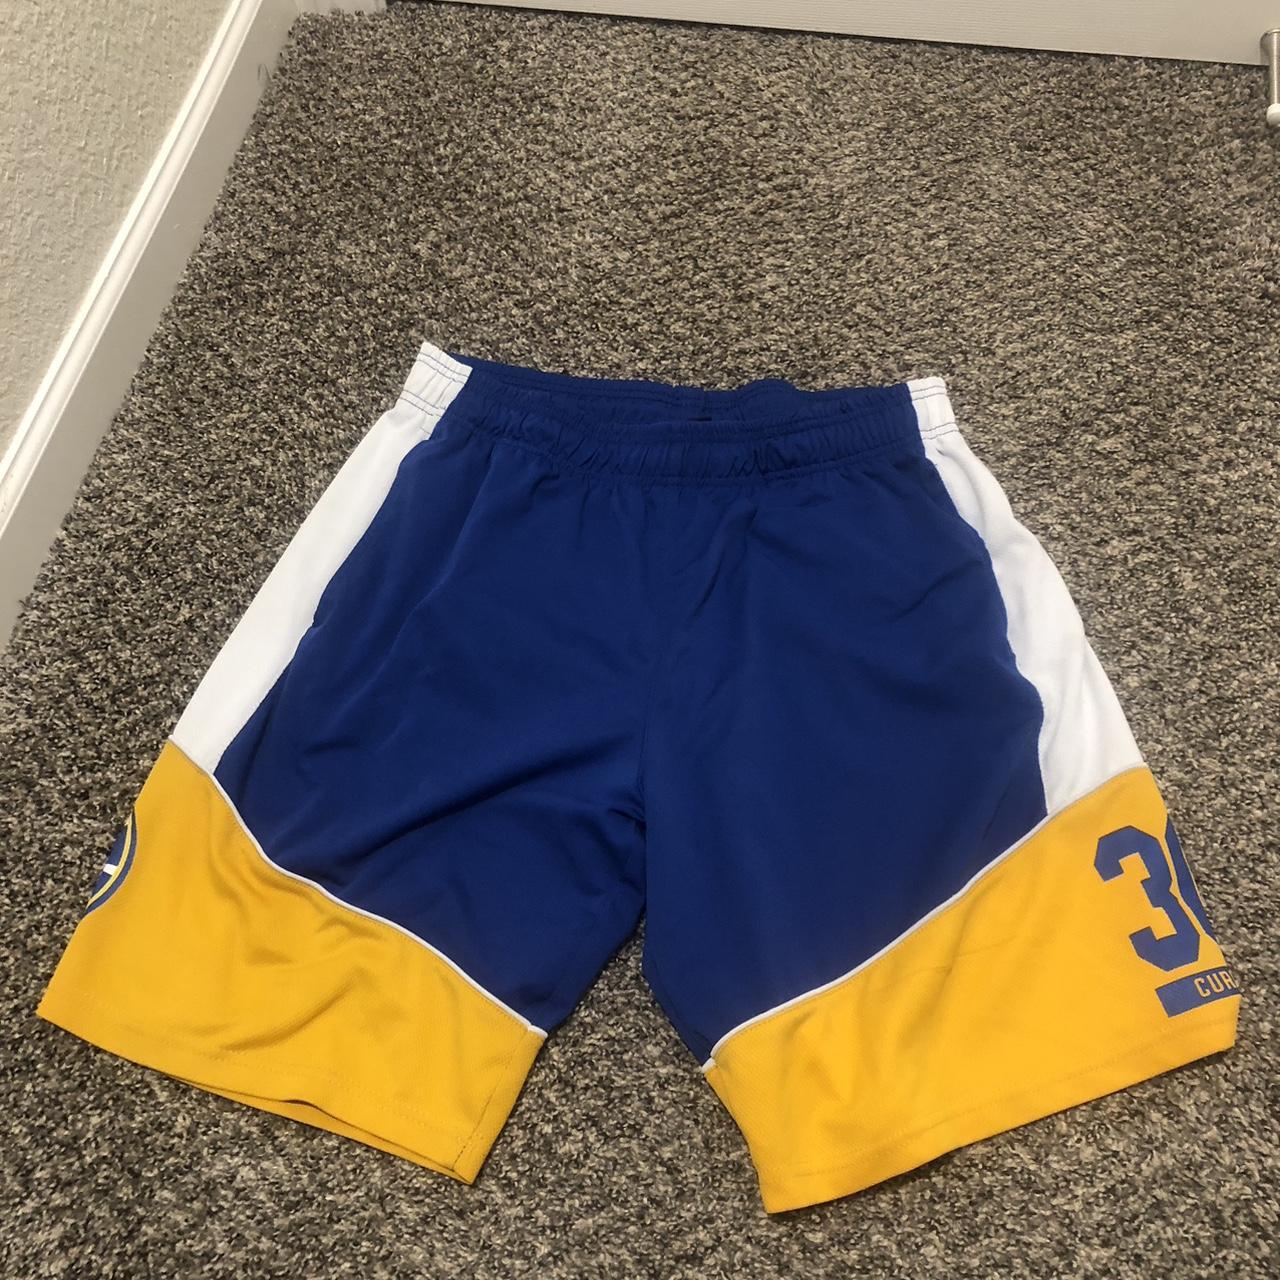 Golden State Warriors NBA Throwback Shorts. Patches - Depop